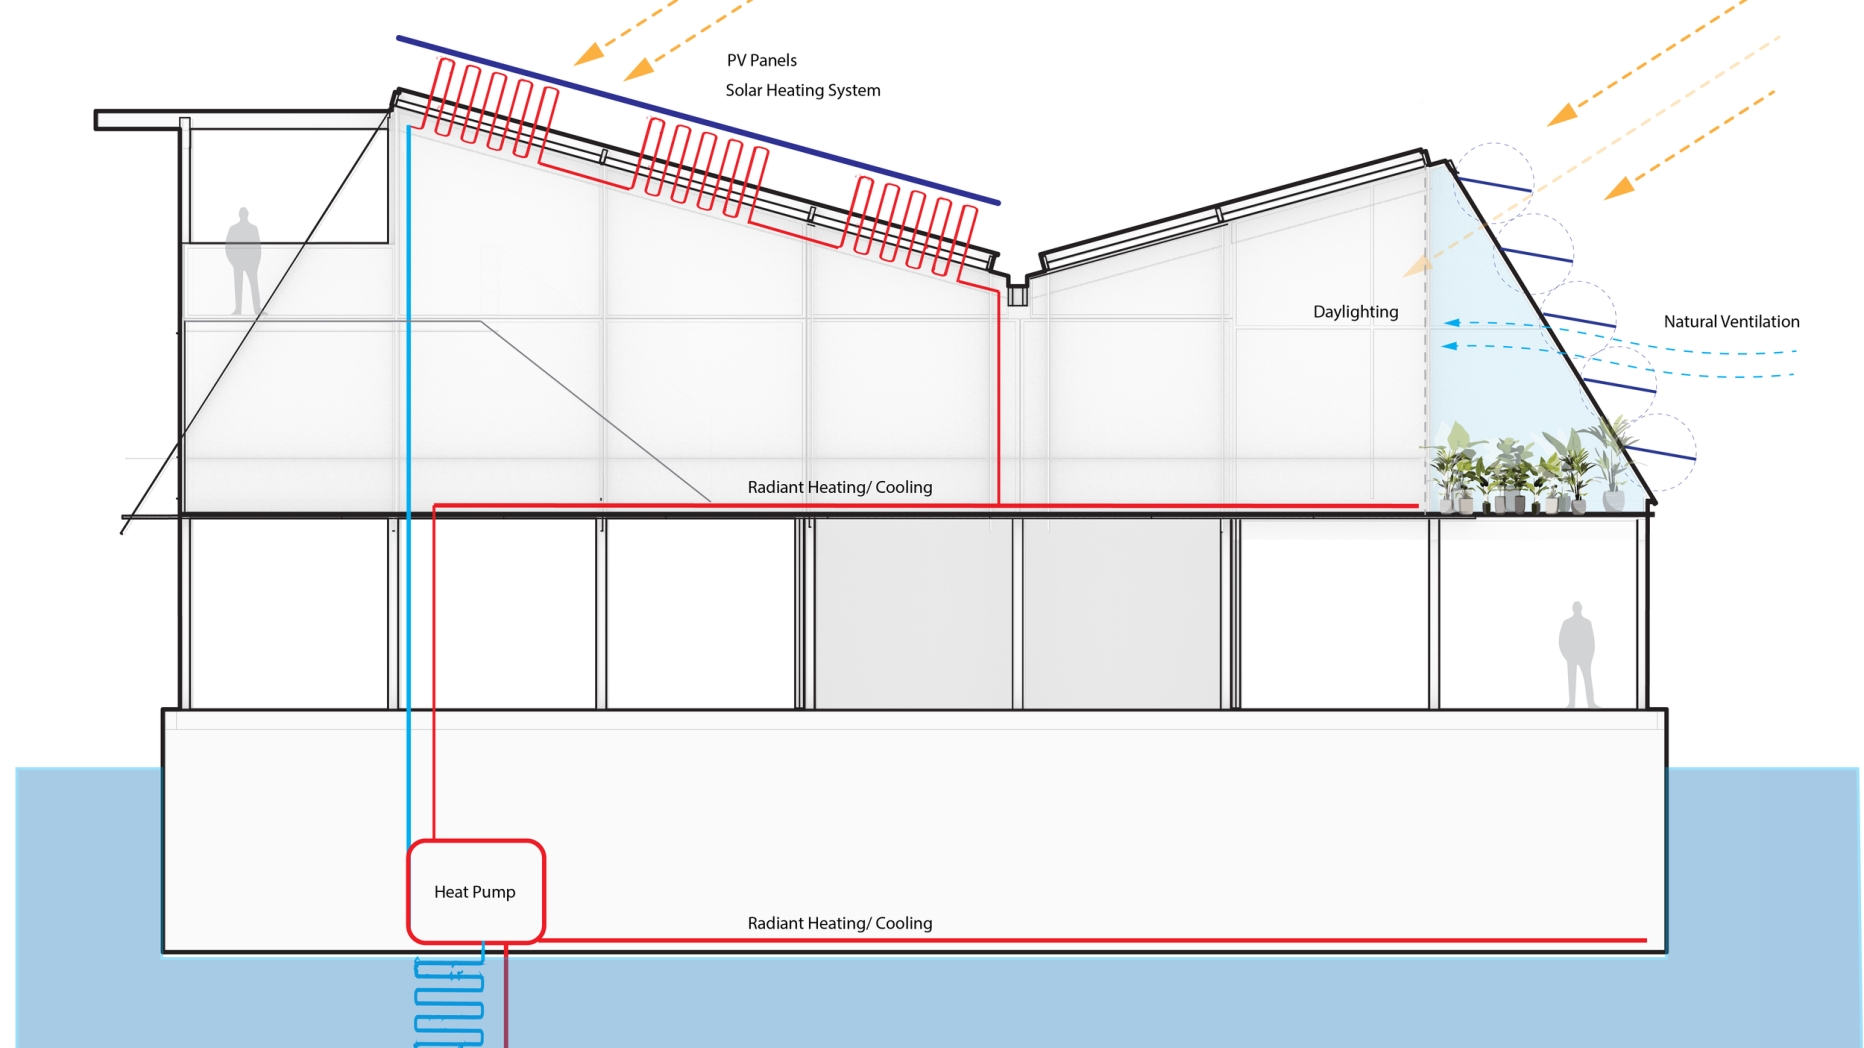 Schematic section/elevation showing translucent facade panels and photovaoltaics on the roof